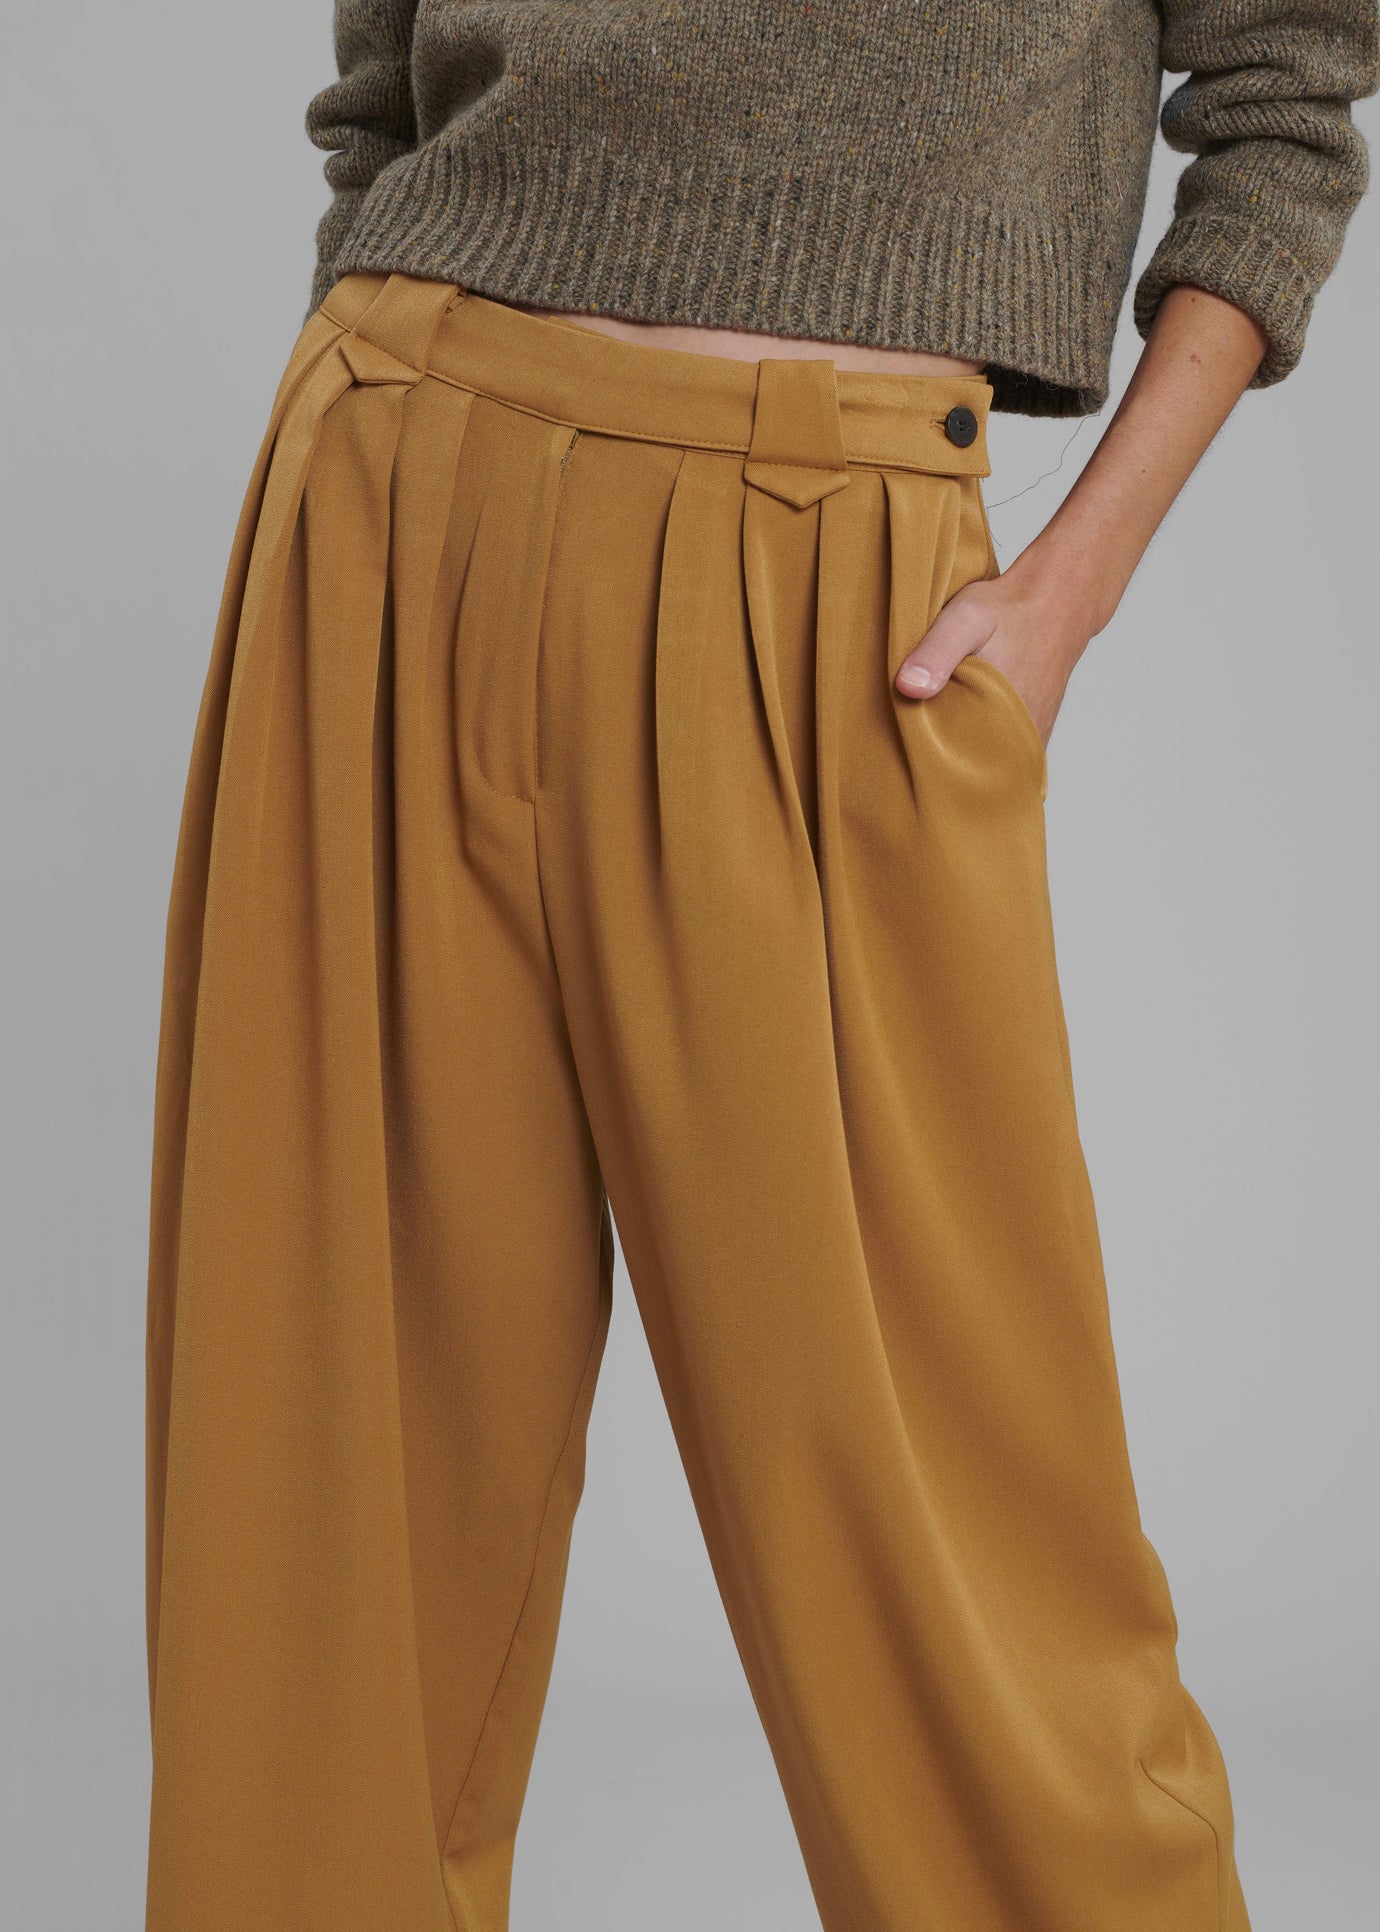 Luce Pleated Pants - Ginger - 1